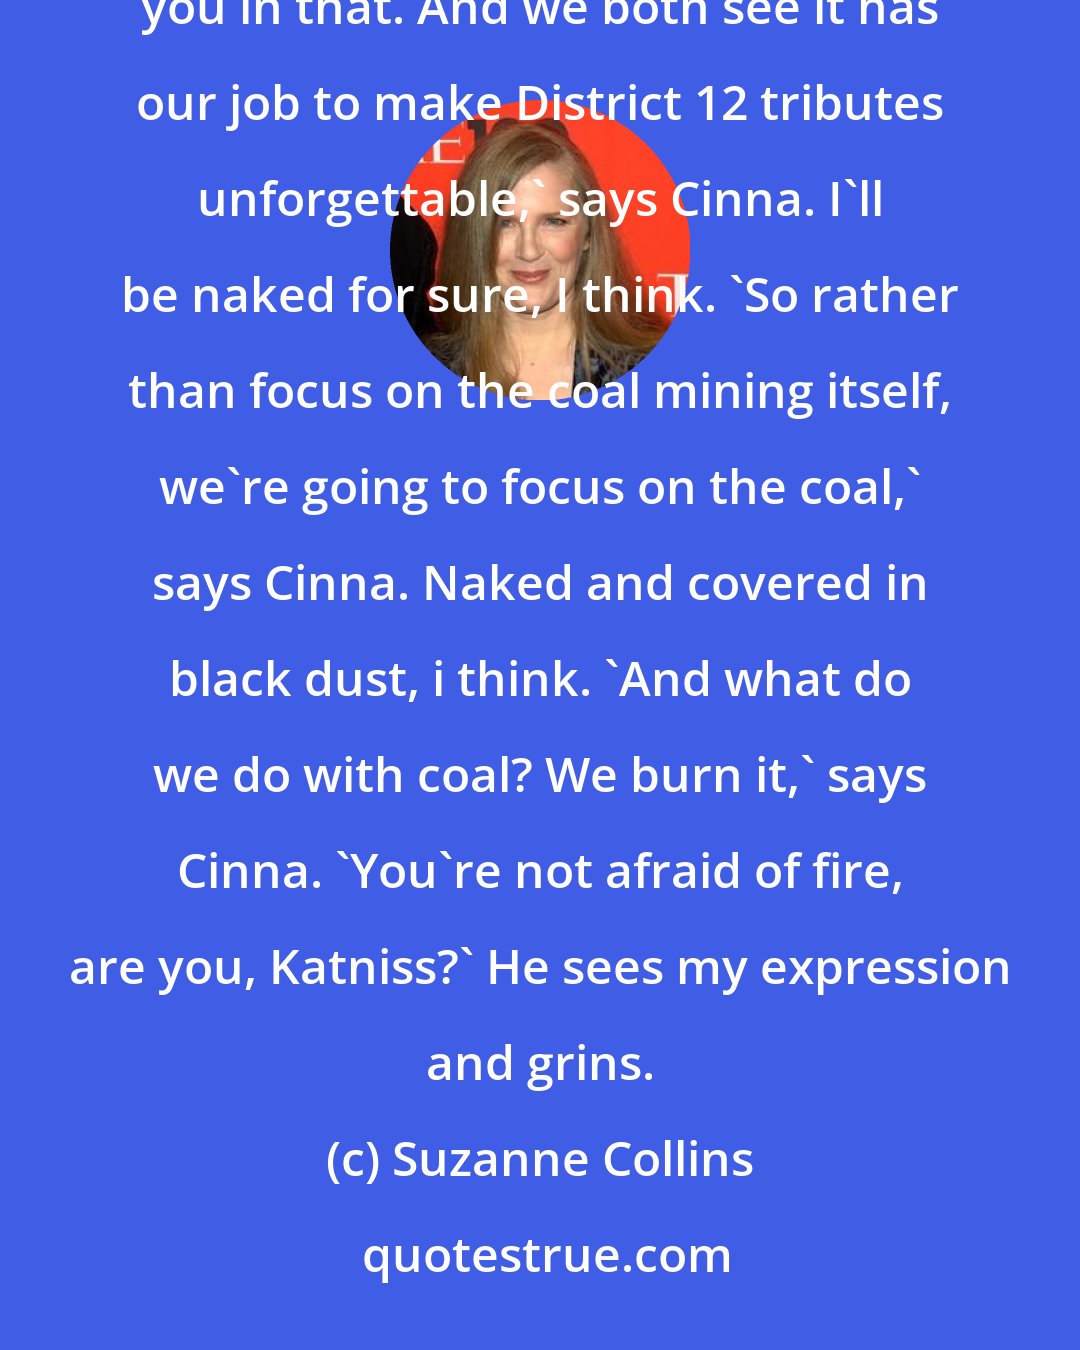 Suzanne Collins: Not exactly. You see, Portia and I think that the coal miner thing's very overdone. No one will remember you in that. And we both see it has our job to make District 12 tributes unforgettable,' says Cinna. I'll be naked for sure, I think. 'So rather than focus on the coal mining itself, we're going to focus on the coal,' says Cinna. Naked and covered in black dust, i think. 'And what do we do with coal? We burn it,' says Cinna. 'You're not afraid of fire, are you, Katniss?' He sees my expression and grins.